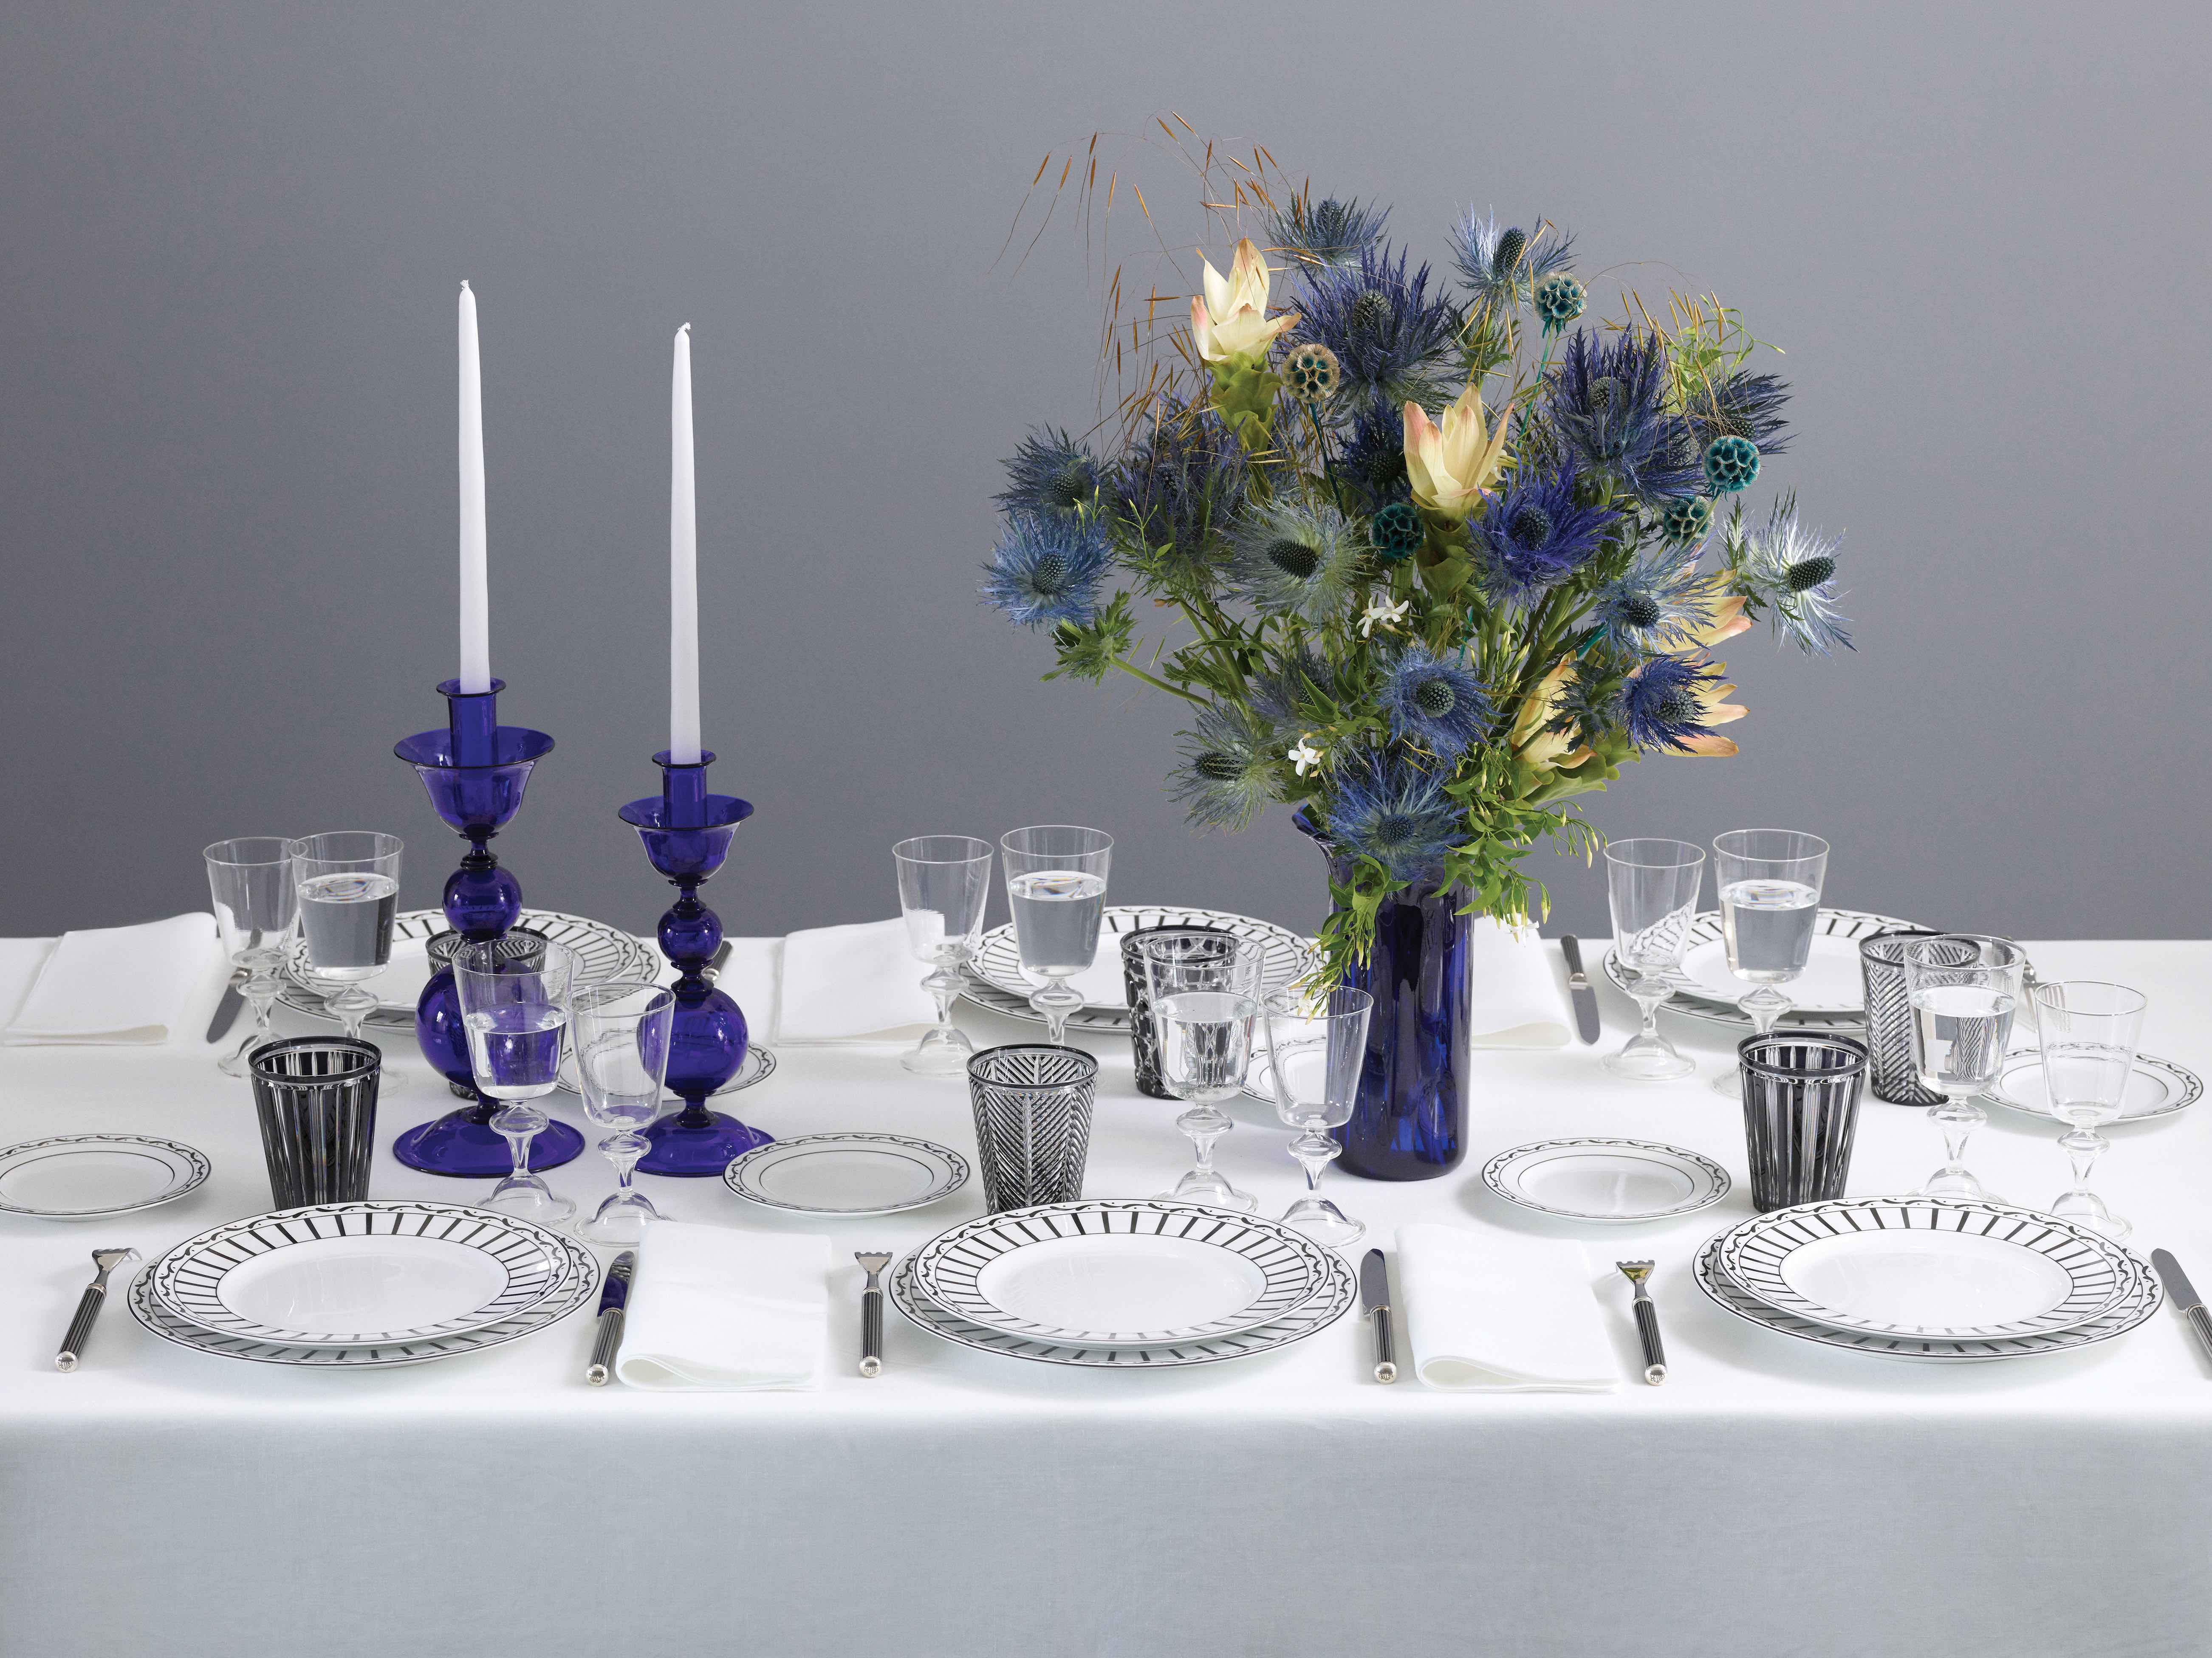 Christian Dior Home Collection Is Now Available - Dior Home Line